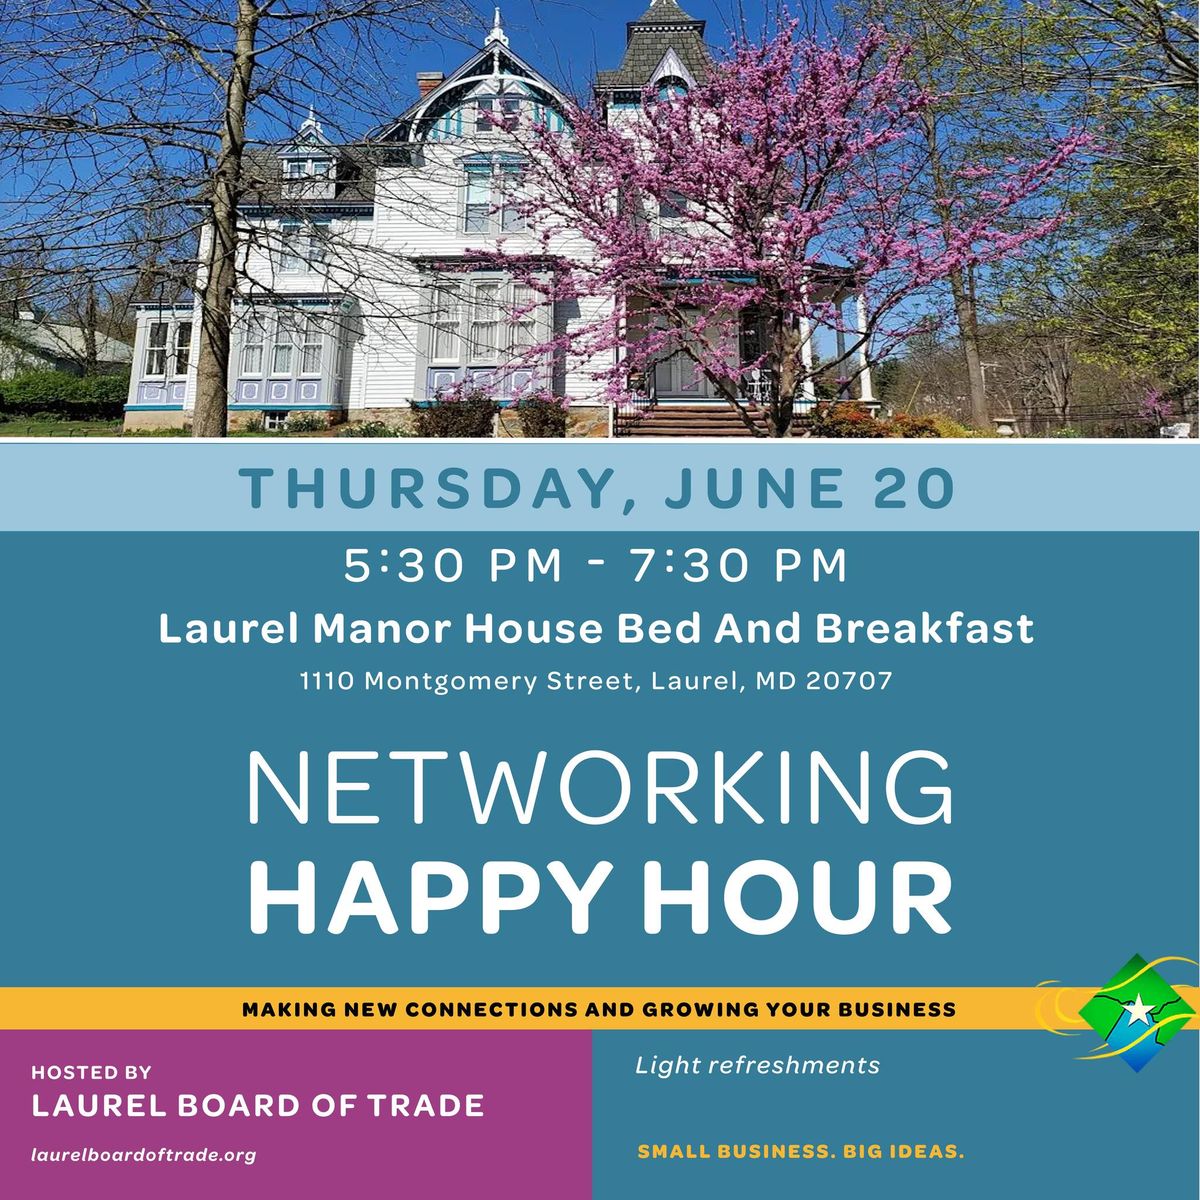 Business Networking at Laurel Manor House Bed and Breakfast